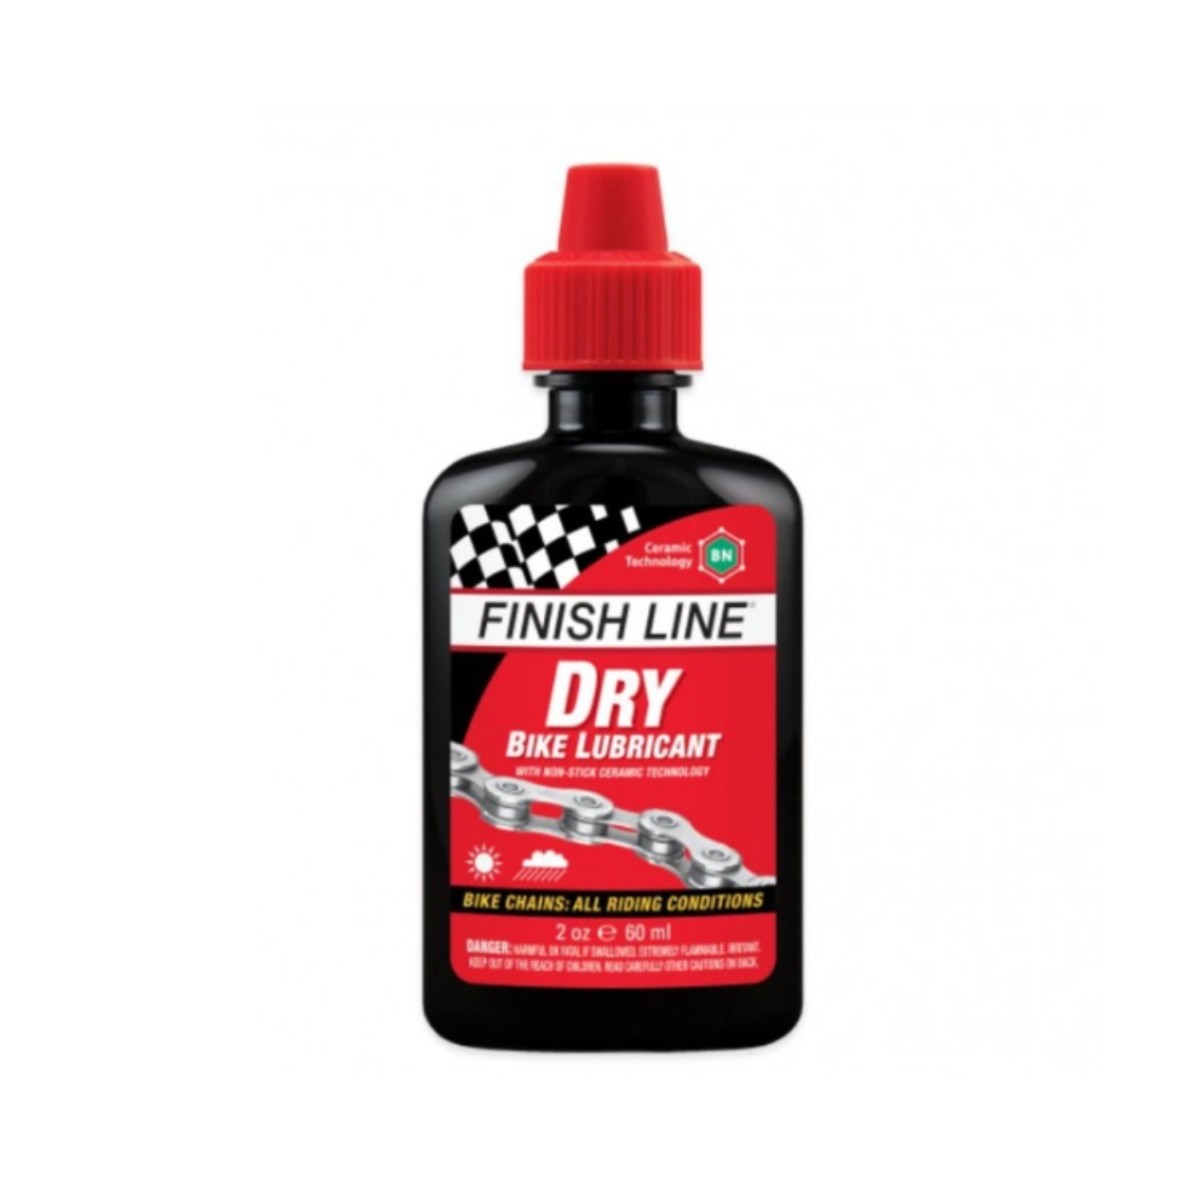 Photos - Bike Accessories Finish Line Dry Lubricant 60ml DX31T00020101